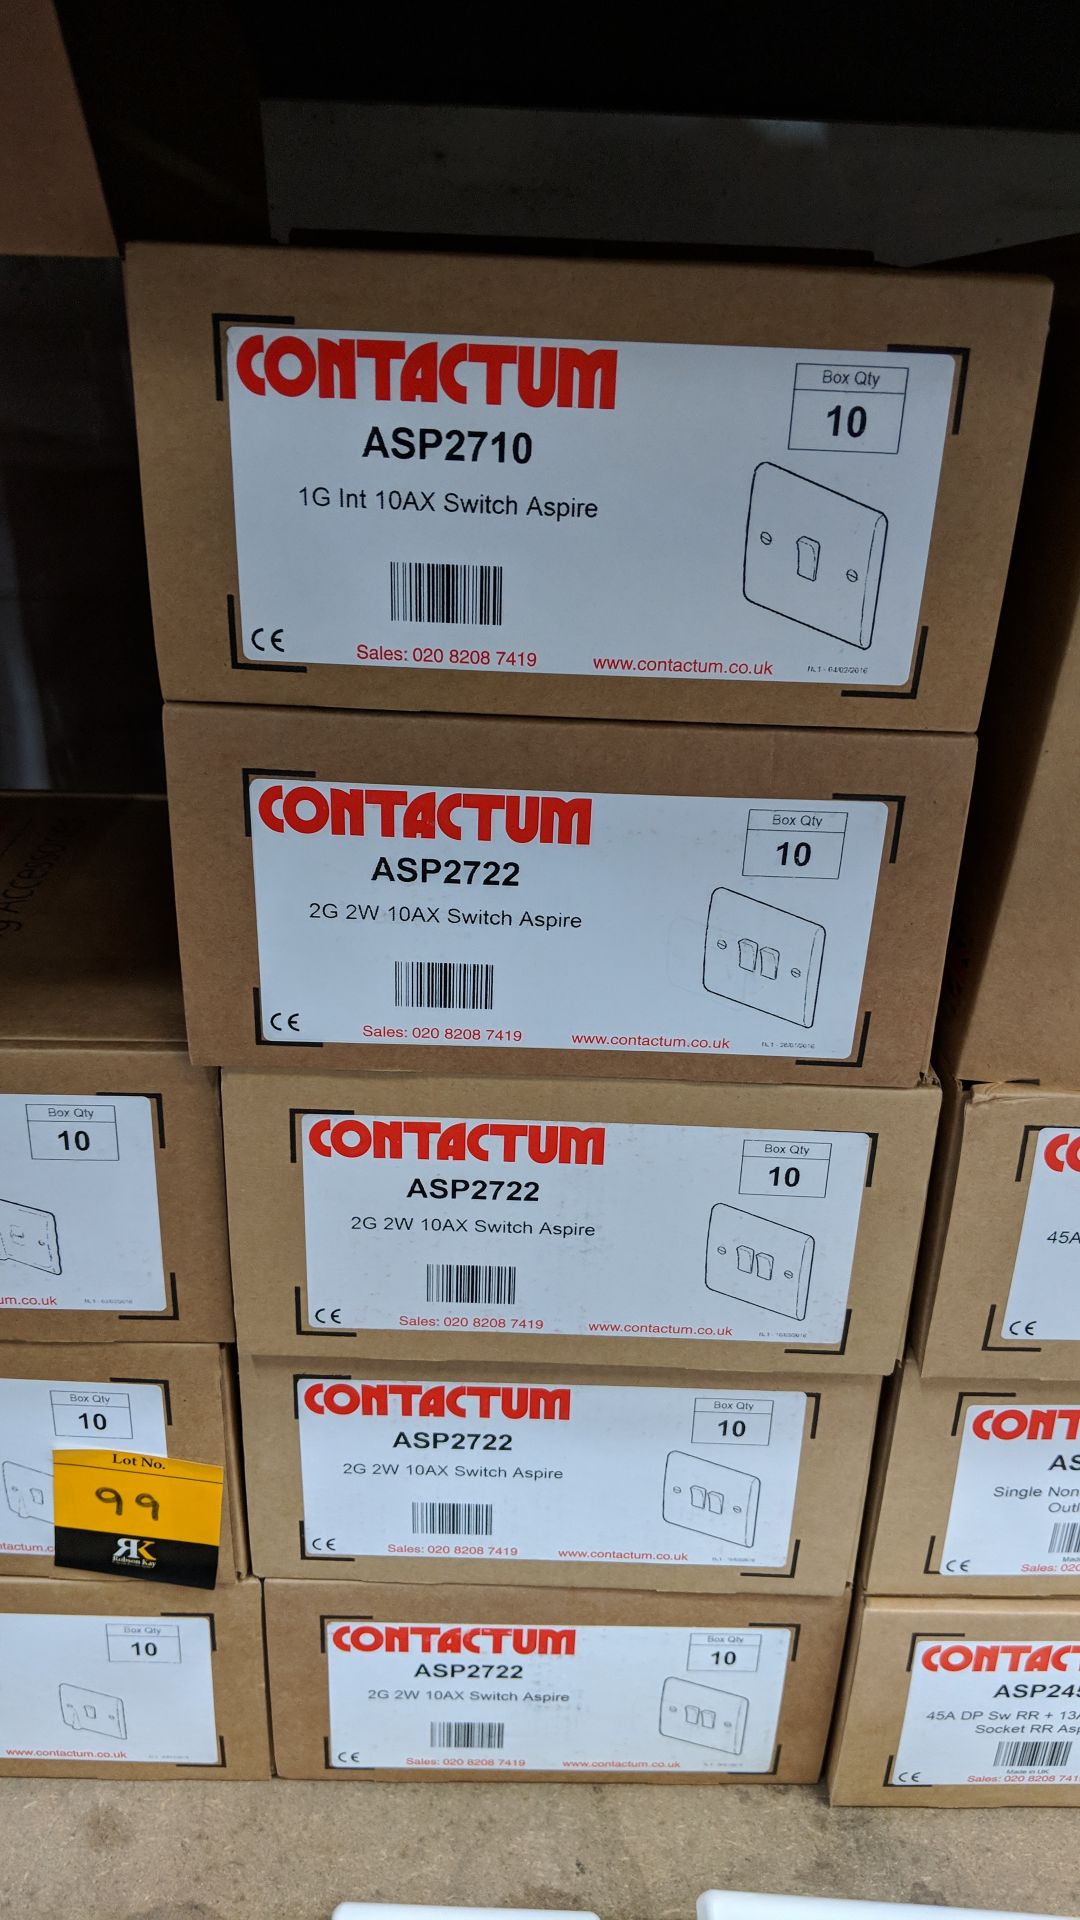 15 assorted boxes of Contactum switches, mostly containing 10 items per box, including single and - Bild 3 aus 6